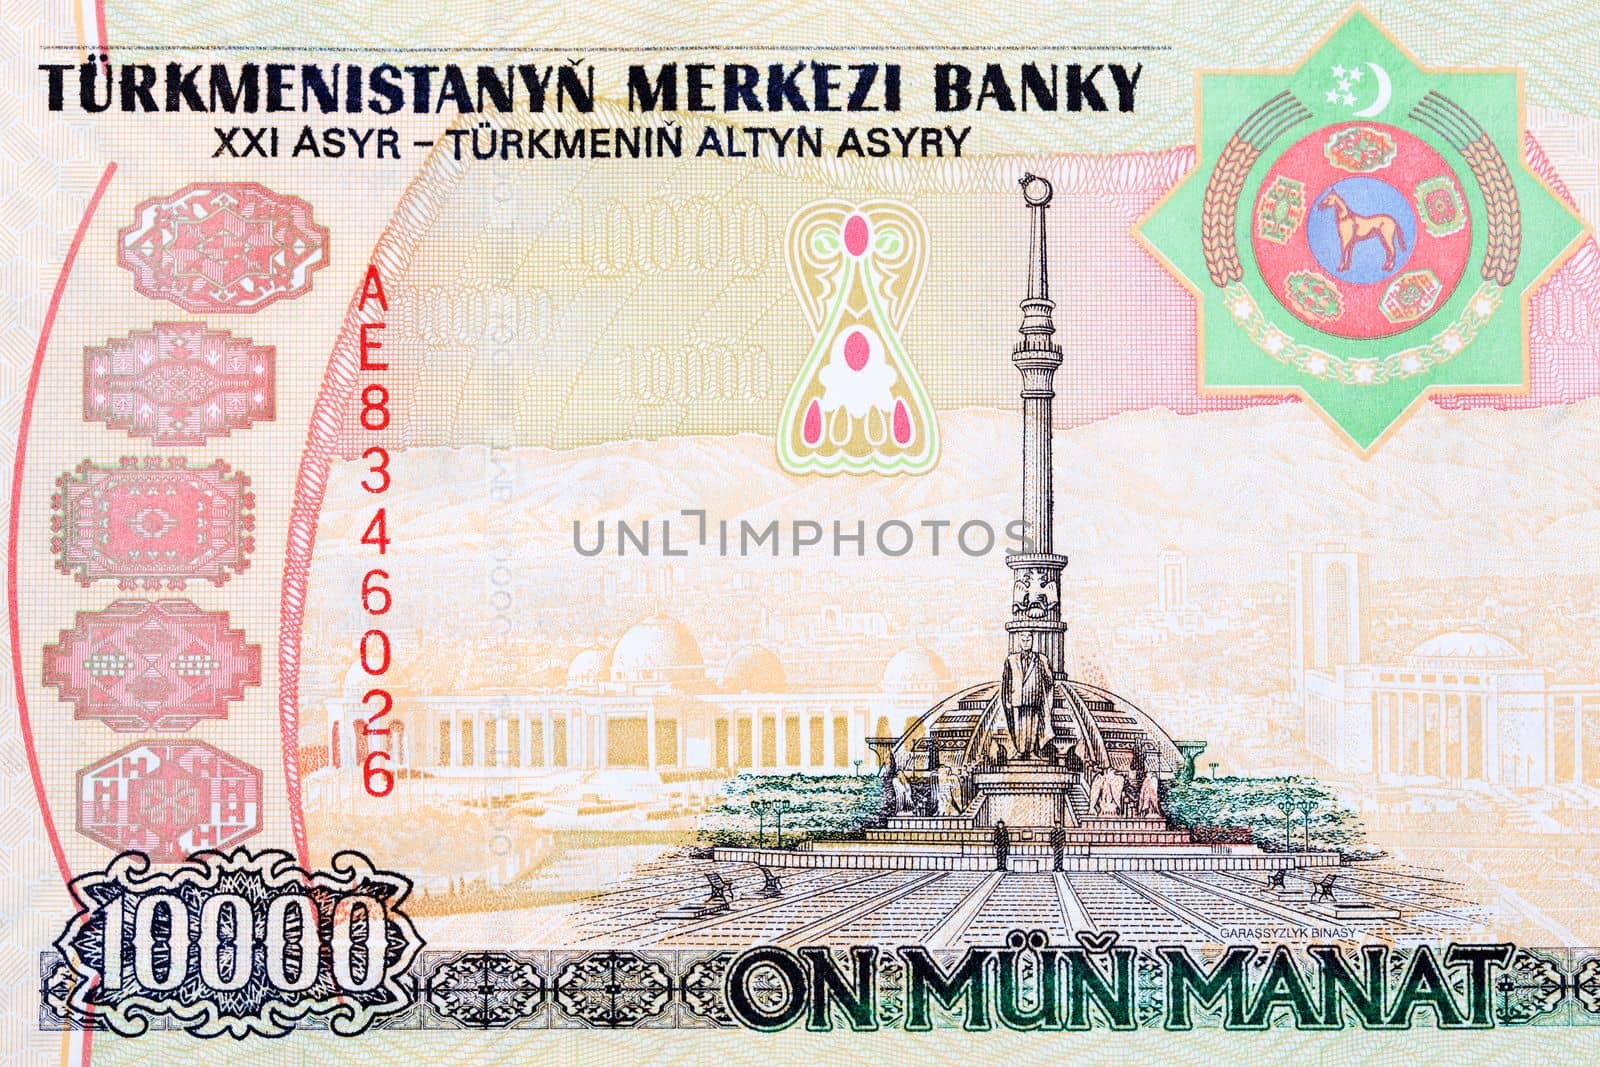 Monument to the Independence of Turkmenistan from money - Manat